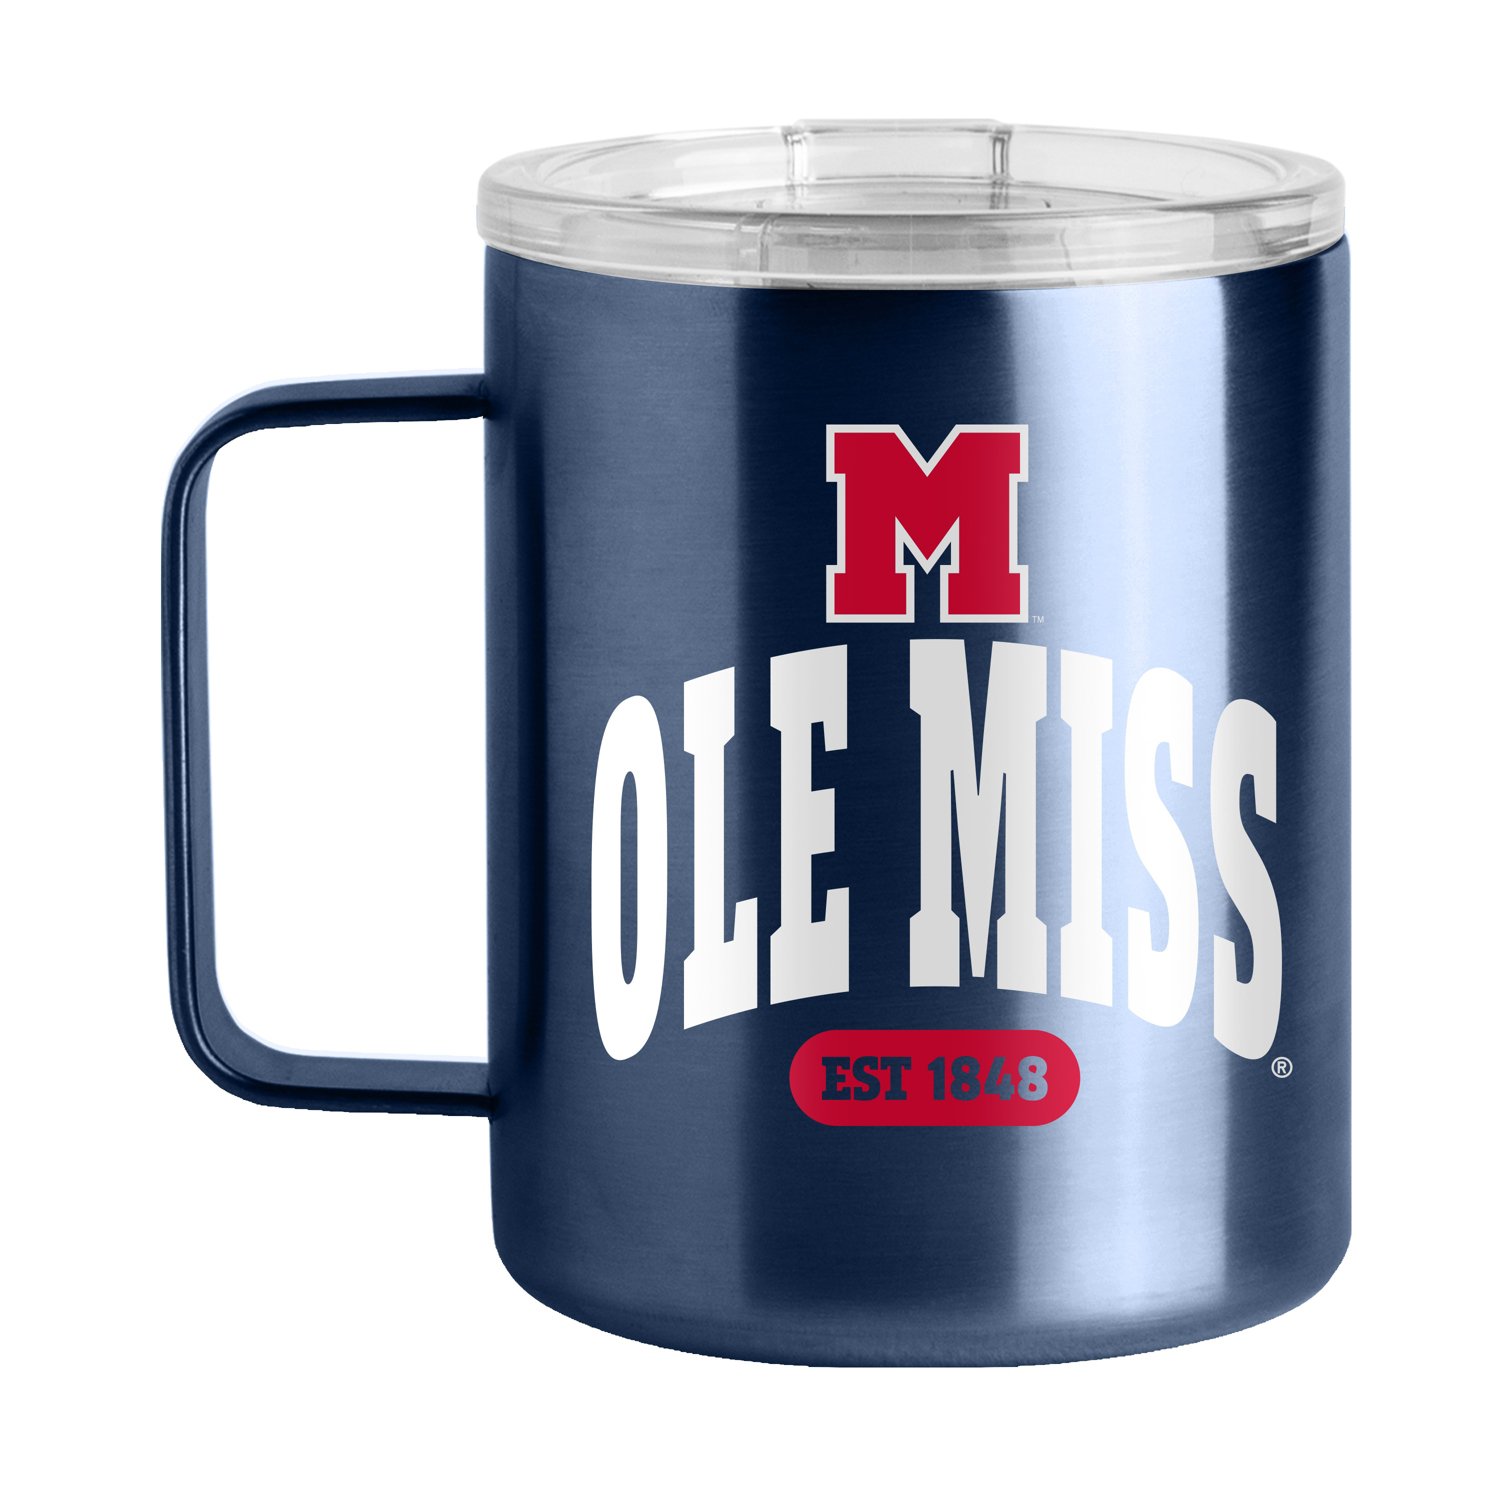 https://academy.scene7.com/is/image/academy//drinkware/logo-brands-university-of-mississippi-15-oz-arch-stainless-steel-mug-176v-s15m-61-blue/662b91ed25a944b38692f40e21031ca0?$pdp-gallery-ng$